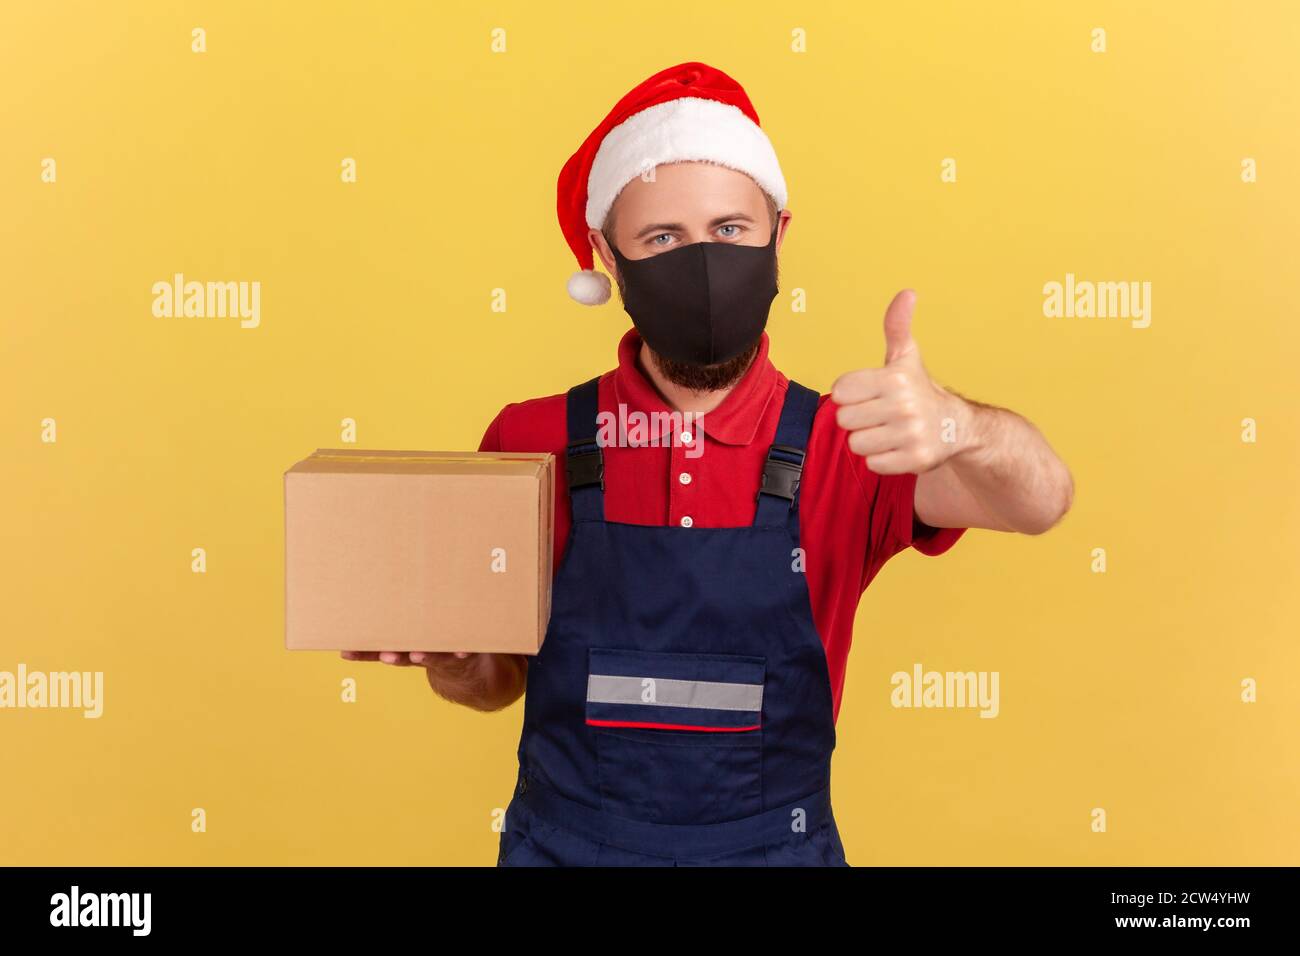 Logistic man in santa claus hat wearing medical protective mask and showing thumbs up holding cardboard box, satisfied with delivery service during qu Stock Photo